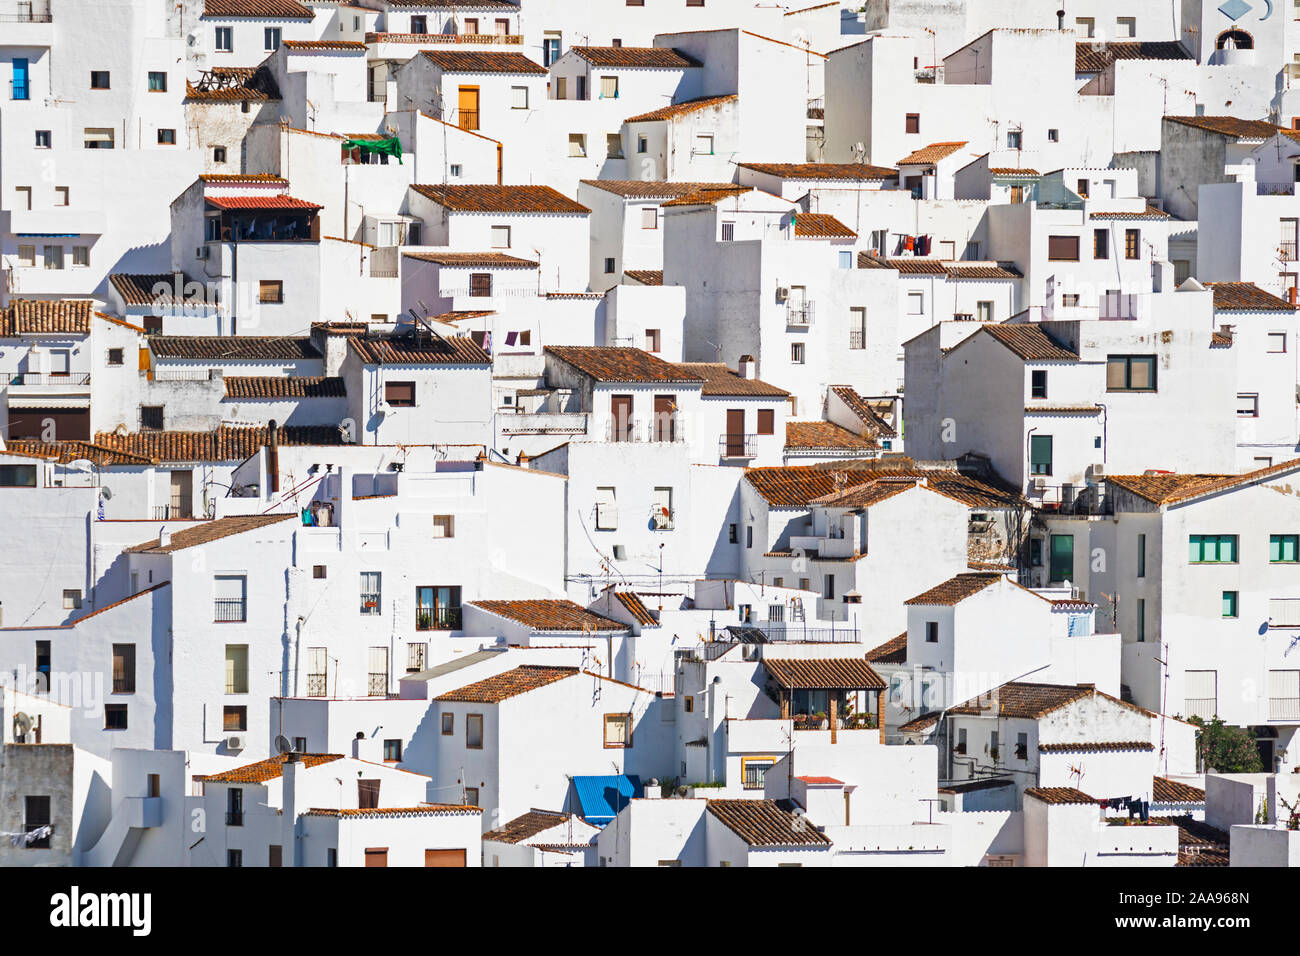 Typical Andalusian architecture in Casares, Malaga Province, Andalusia, southern Spain. Stock Photo